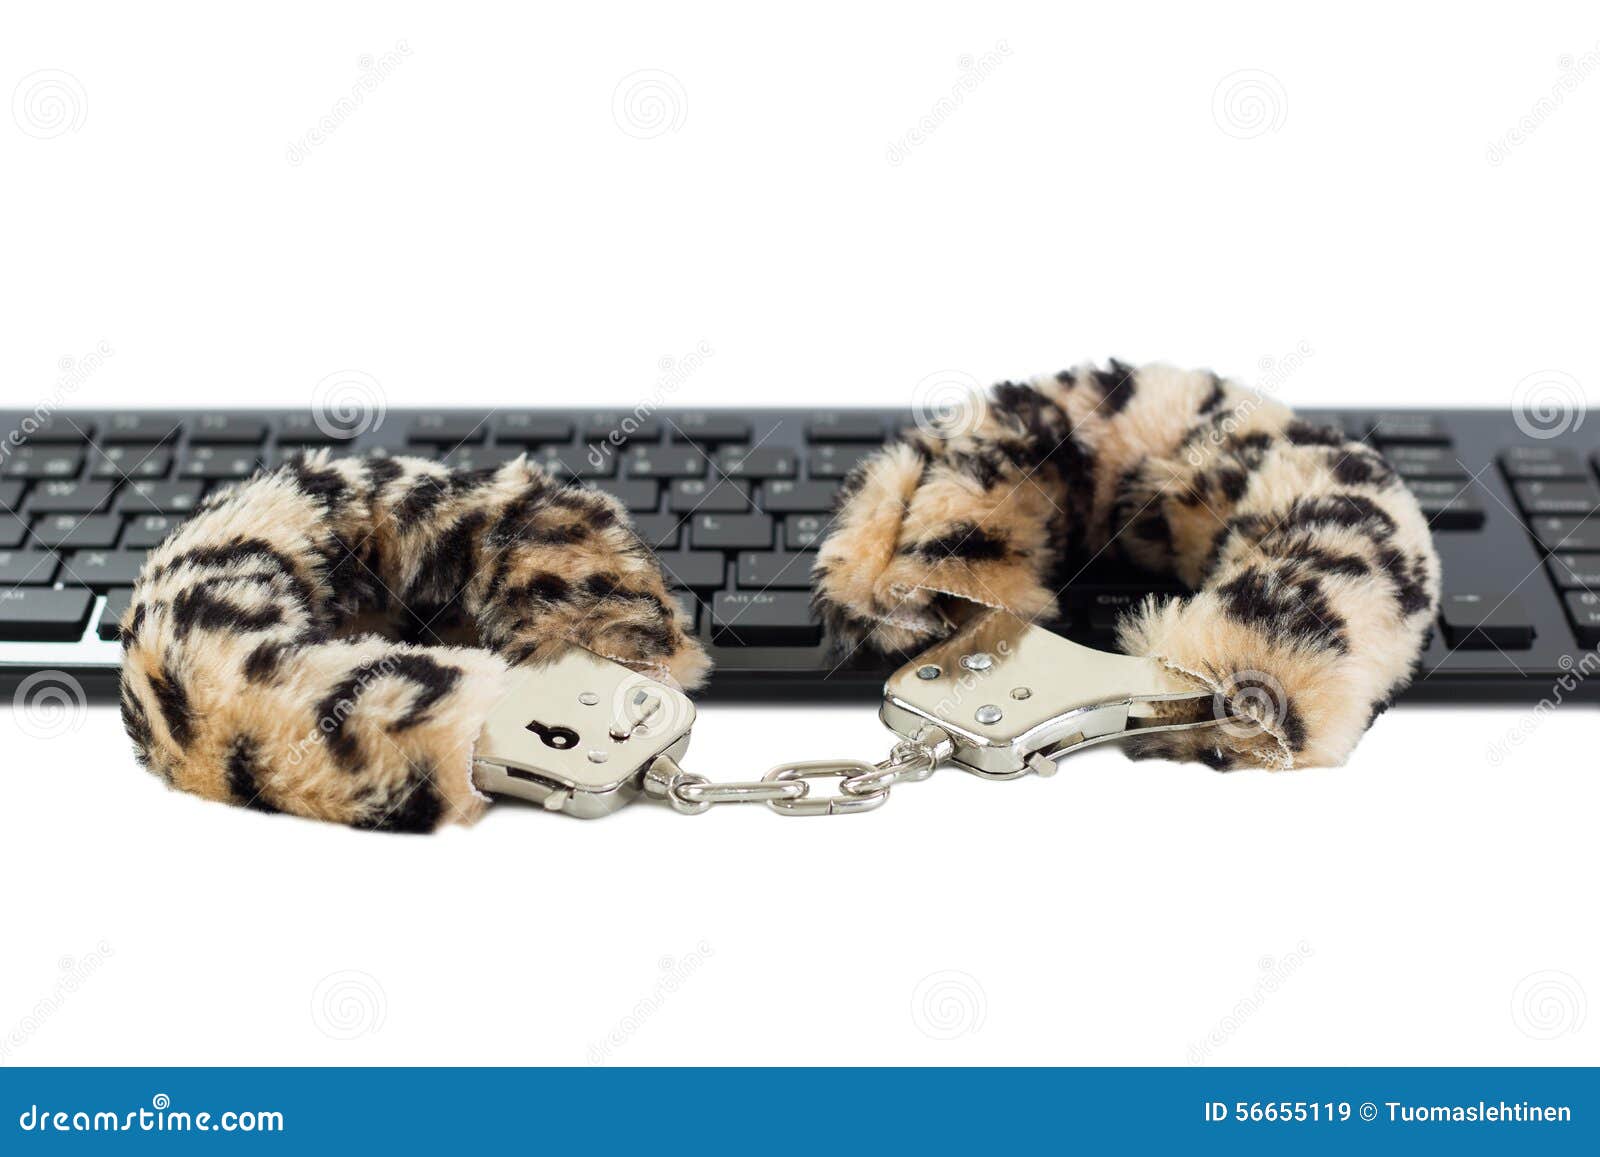 White Furry Kitten Porn - Sex Toy Handcuffs On A Keyboard Stock Image - Image of ...